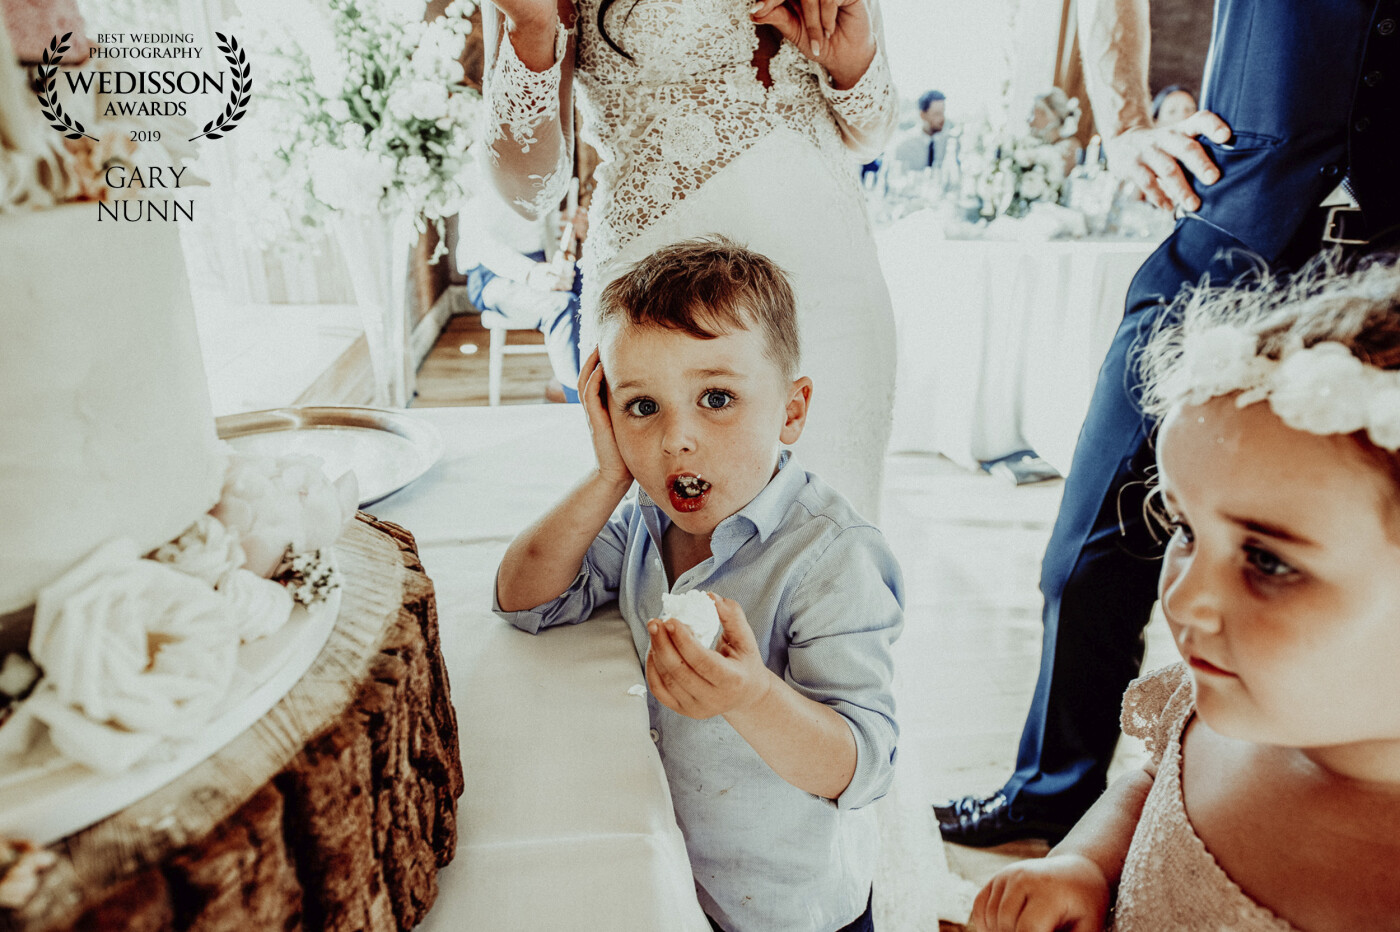 Another from Elmore Court in Gloucestershire. This young lad, the little boy of the bride and groom decided JUST before they are about to cut the cake to sneak a bit into his mouth....and I caught him red handed. 